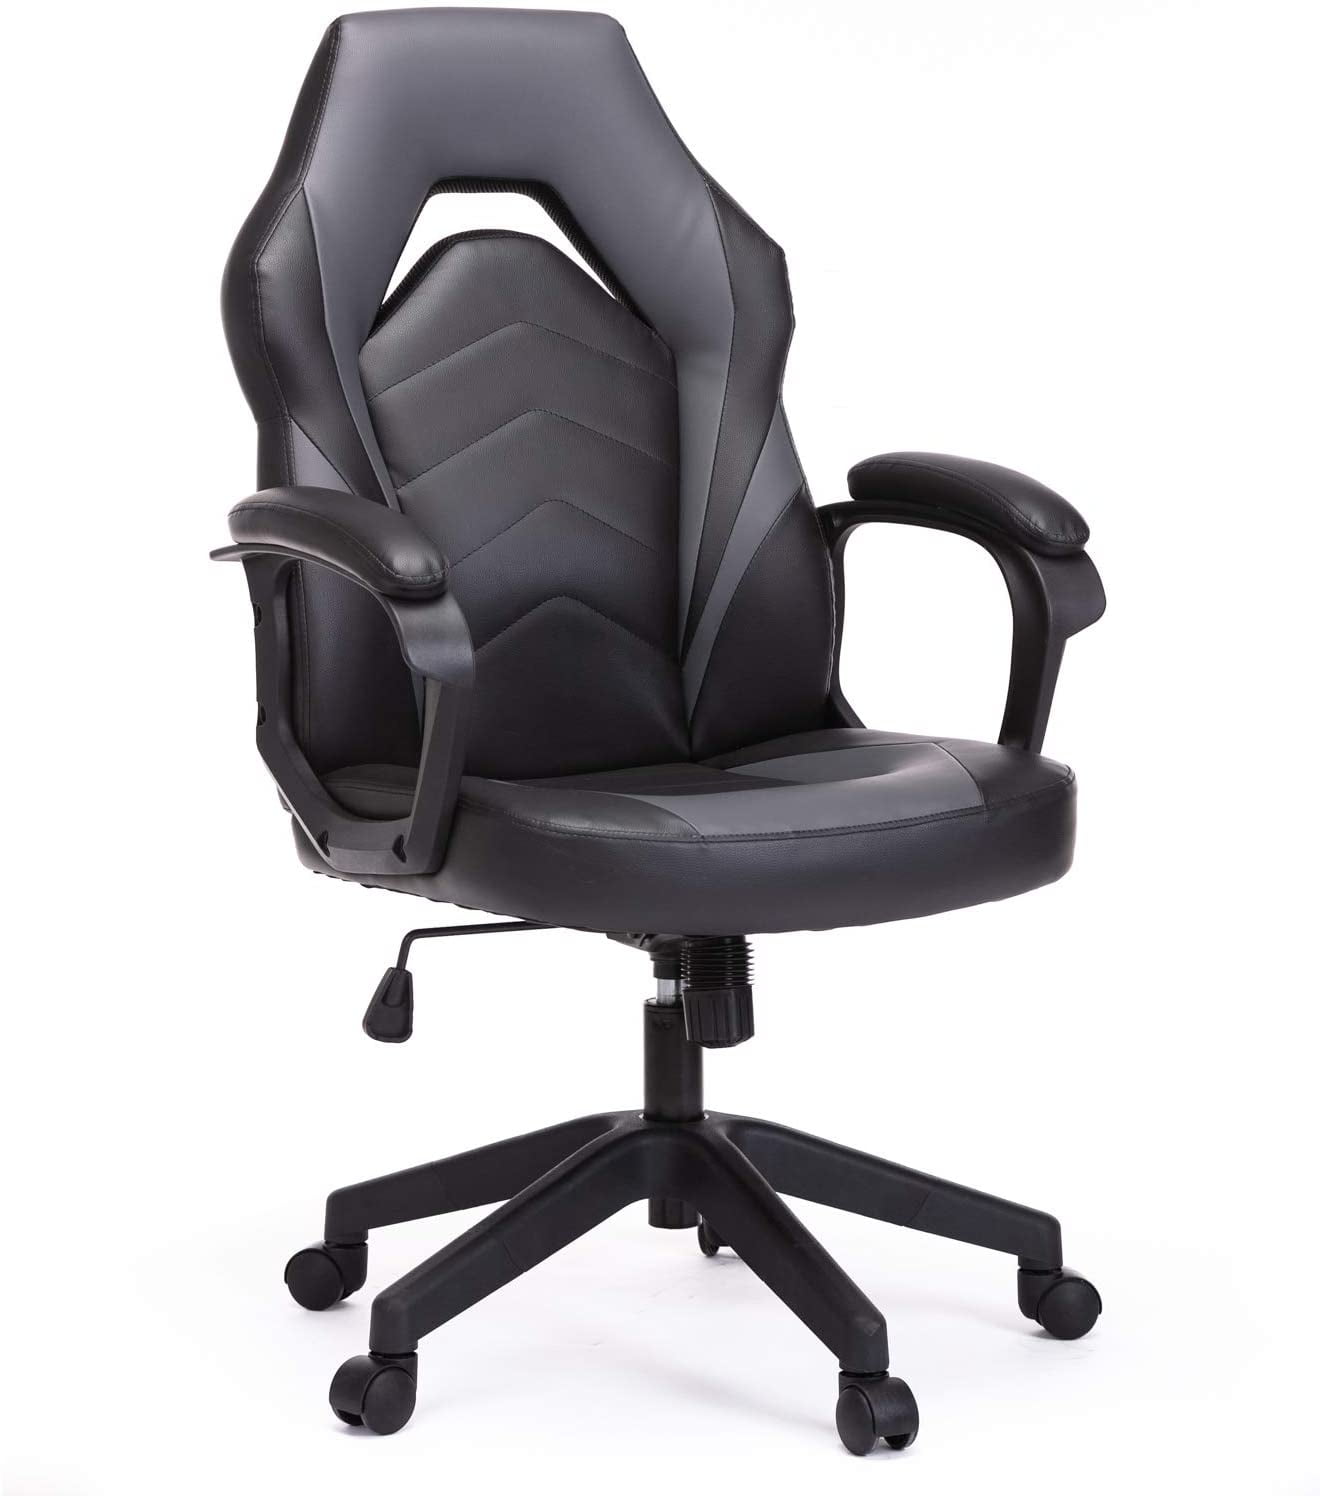 Smugdesk Home Office Adjustable Padded Computer Task Chair Office